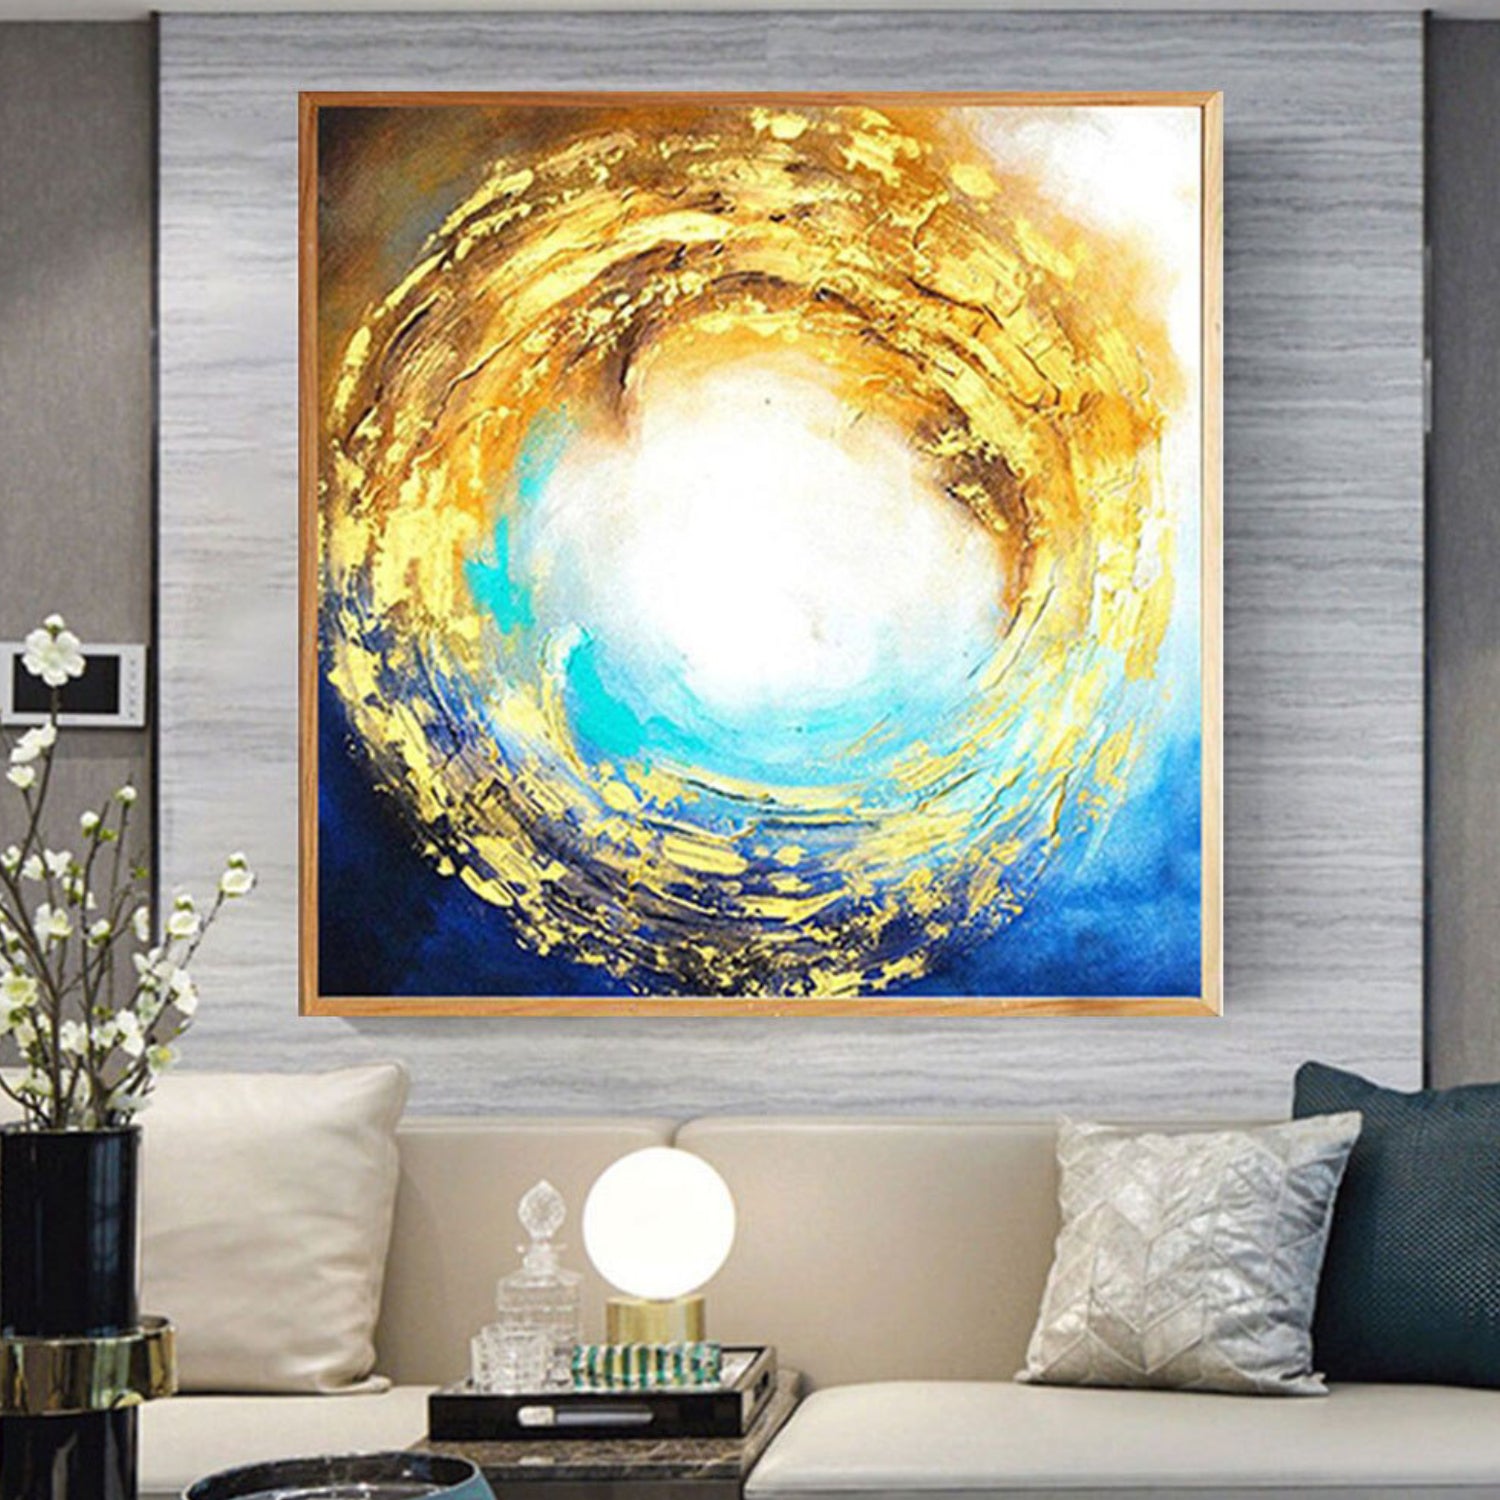 Contemporary Golden Ring Wave Wall Painting